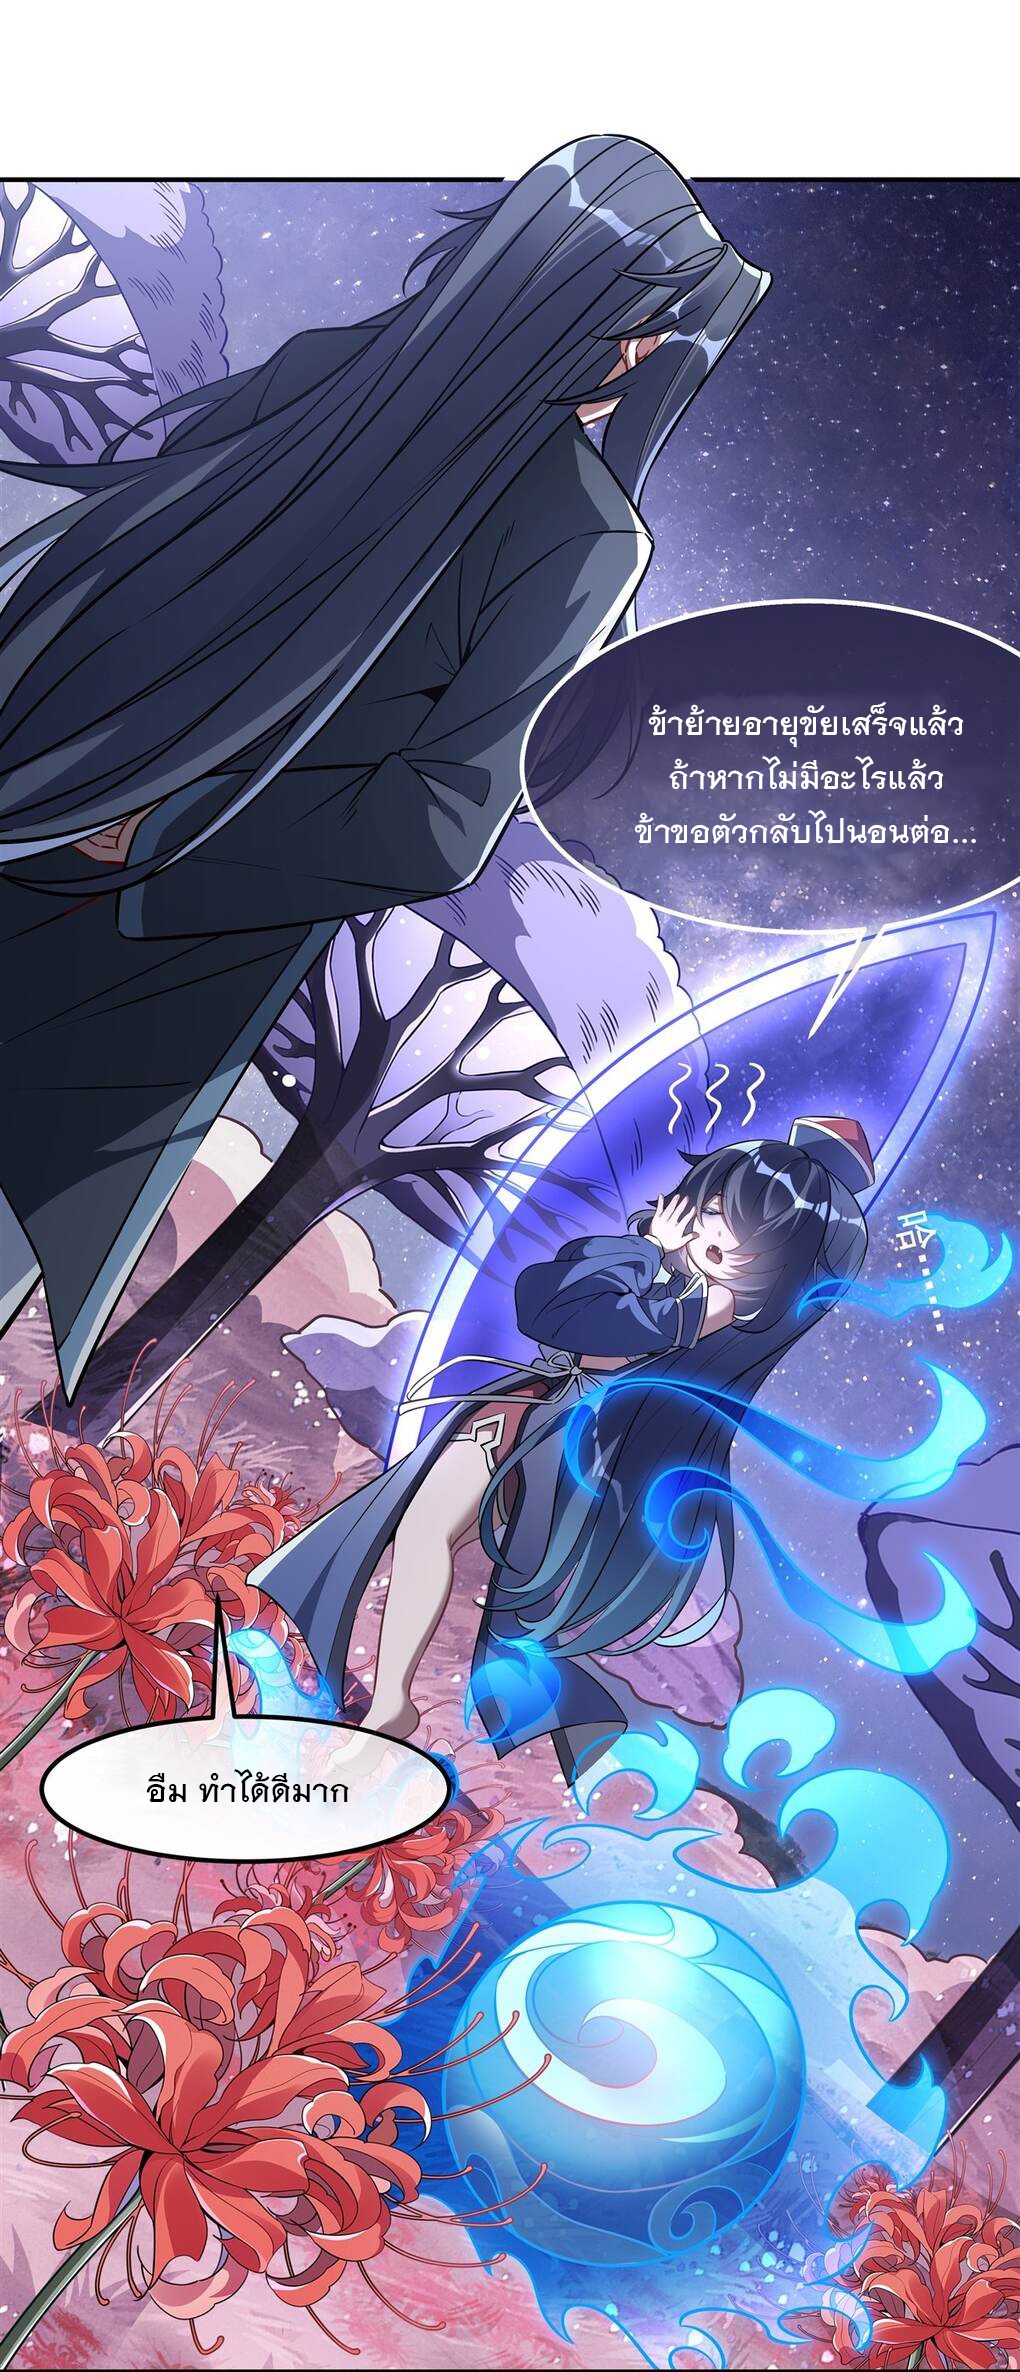 My Female Apprentices Are All Big Shots From the Future Ã Â¸â€¢Ã Â¸Â­Ã Â¸â„¢Ã Â¸â€”Ã Â¸ÂµÃ Â¹Ë† 92 (35)